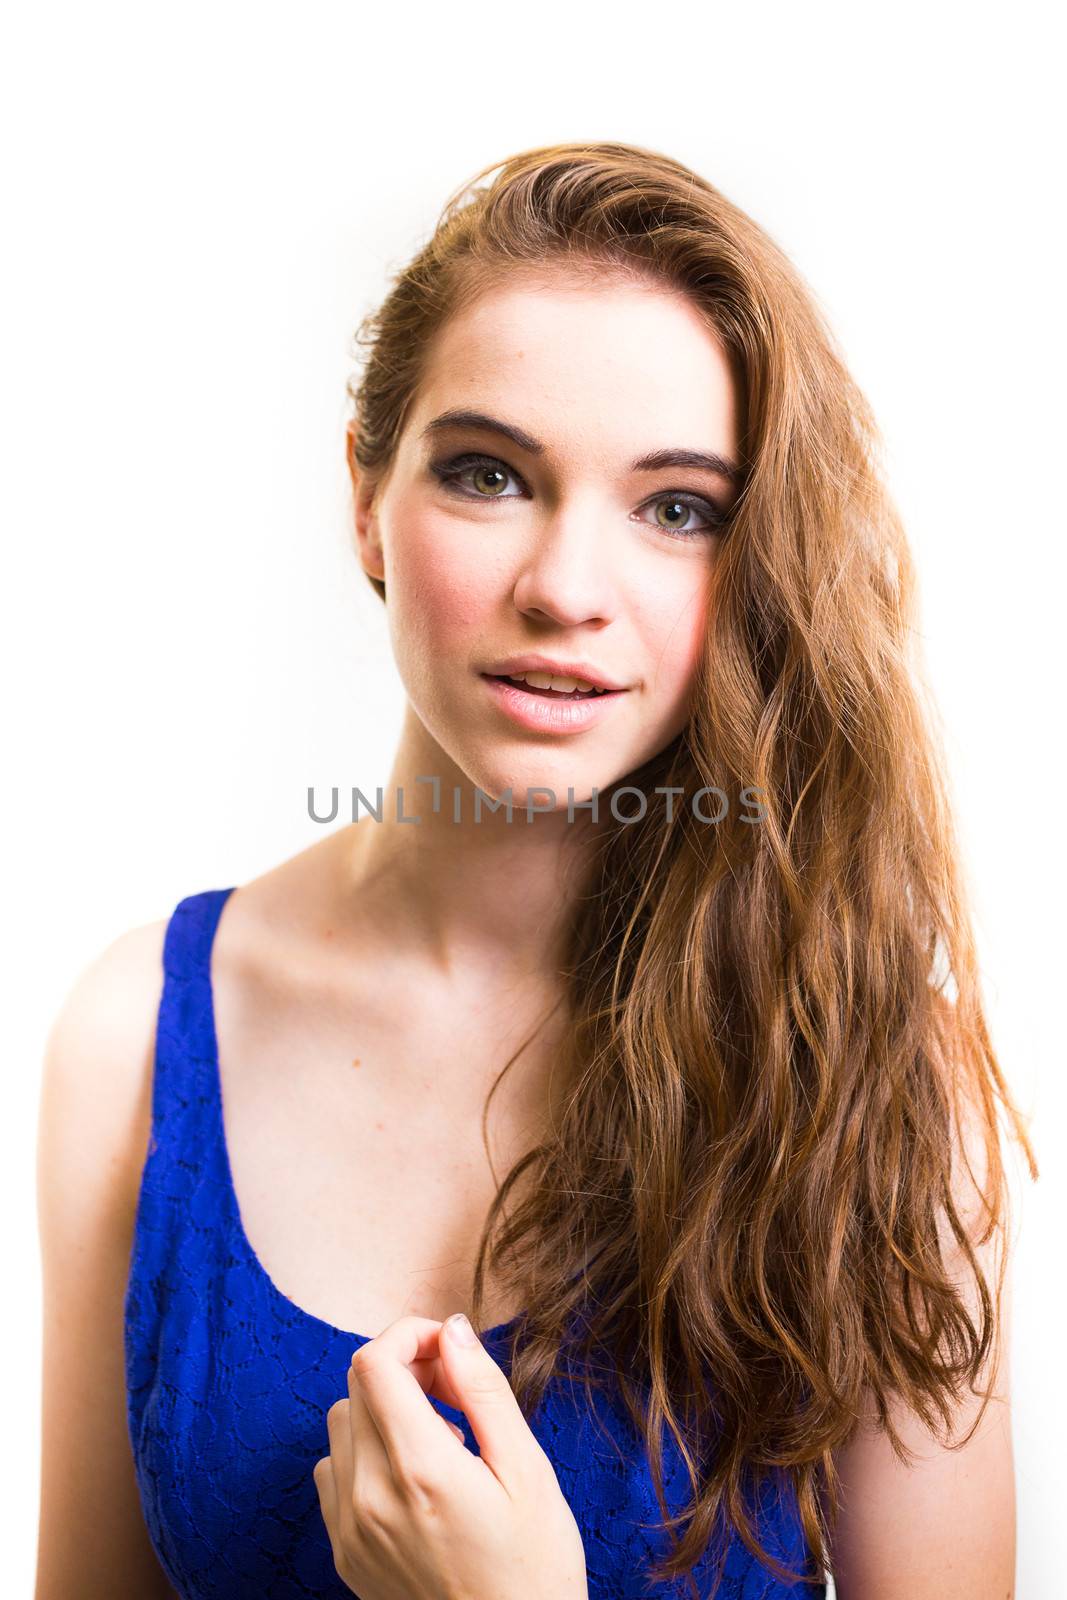 An attractive teen poses for a photo indoors in a lighting studio against a white background with a fashion style feel to the image.